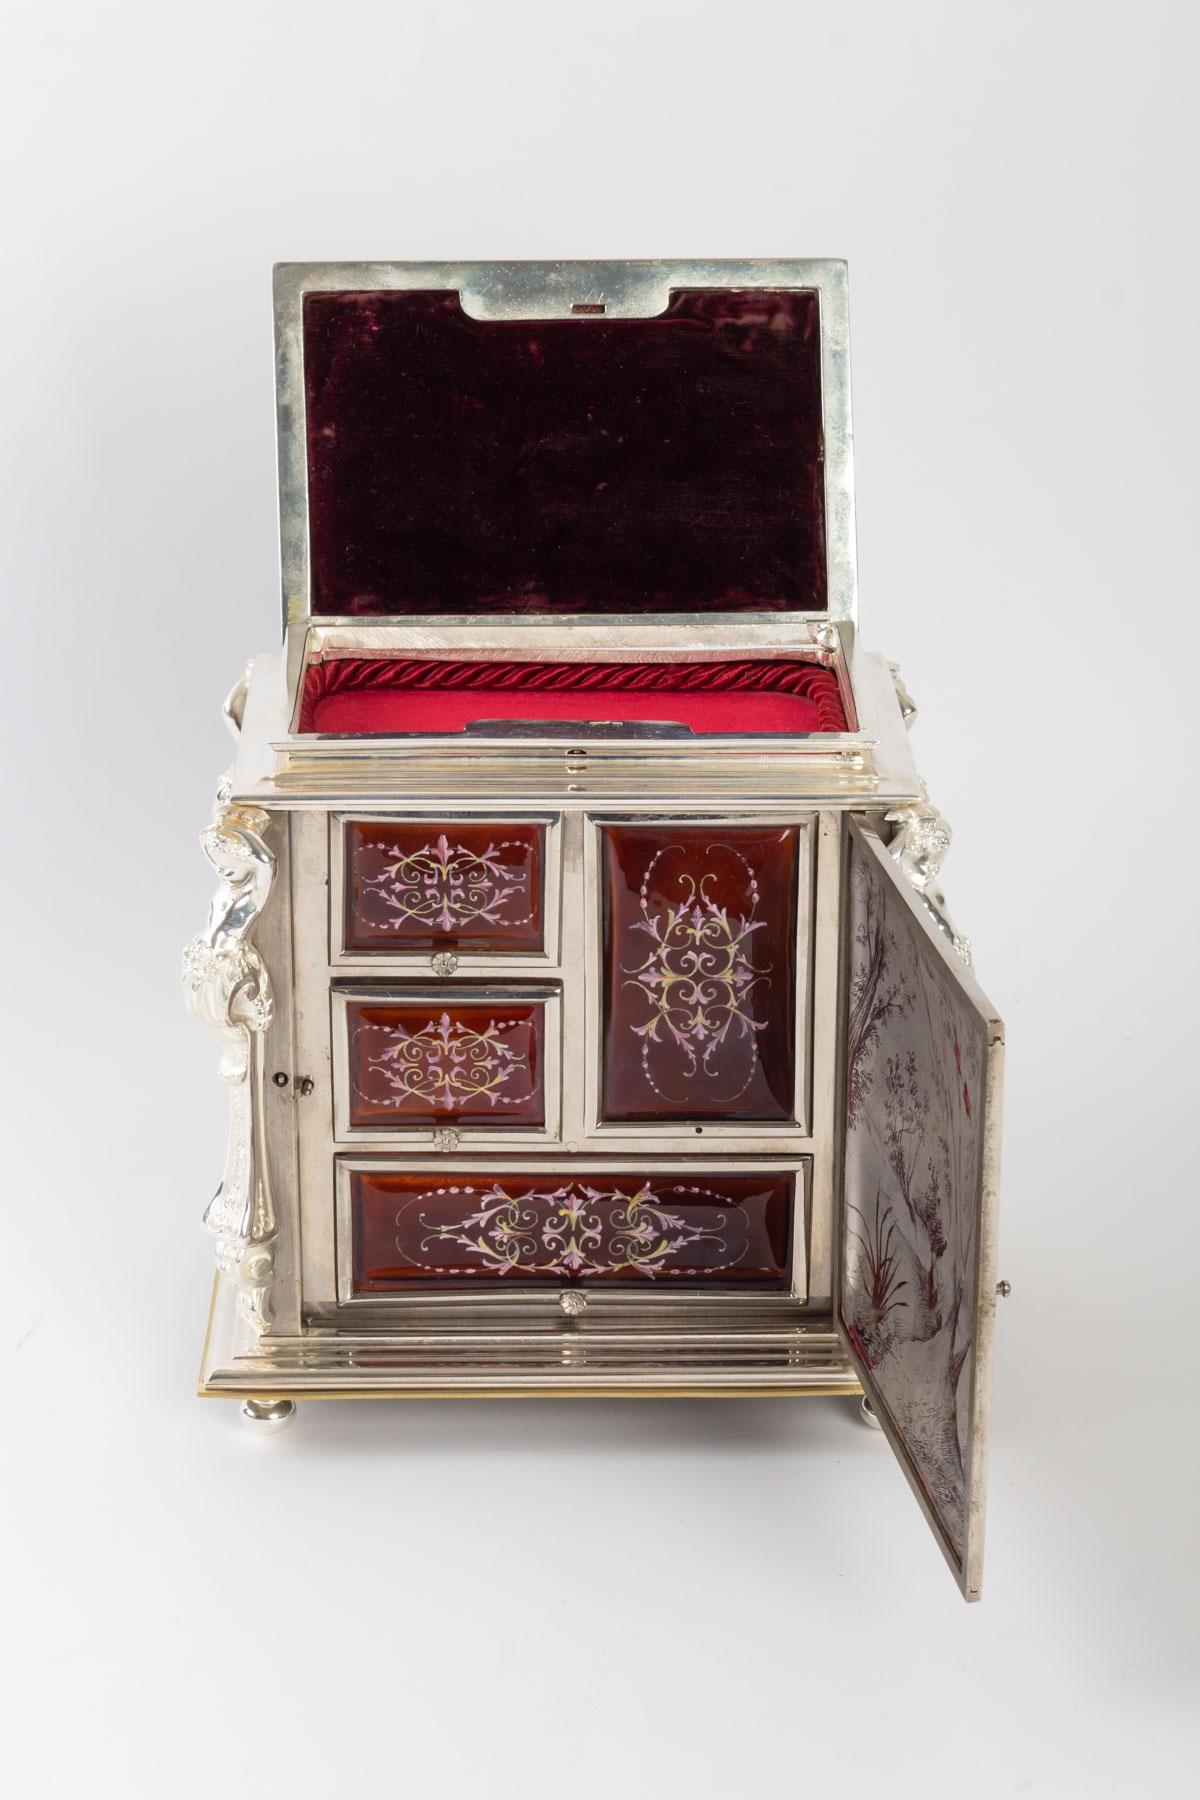 19th Century Enamel and Silver Bronze Jewelry Box Signed by L. GOBLENTZ